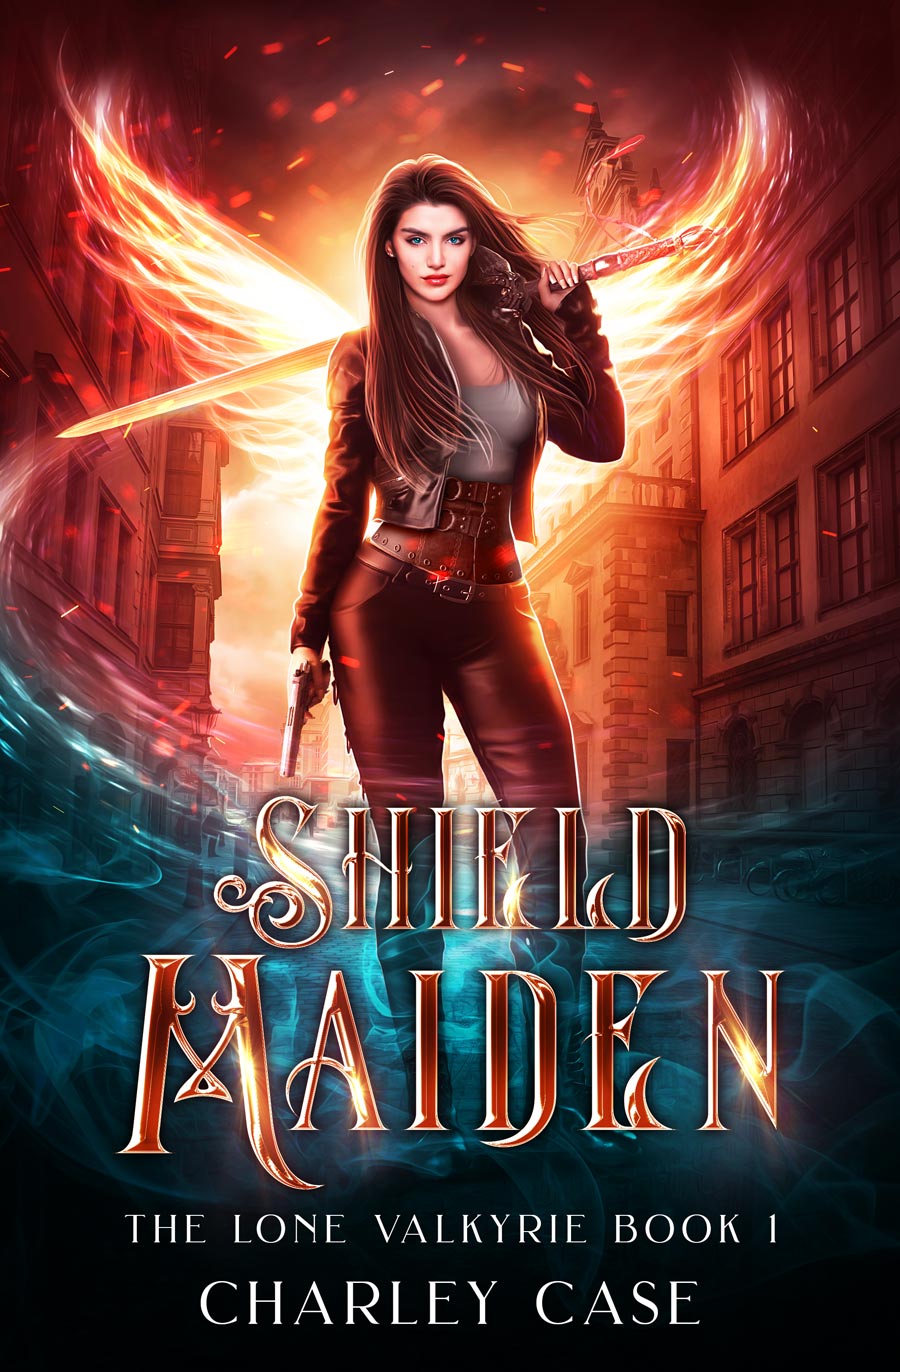 The Lone Valkyrie Book 1: Shield Maiden